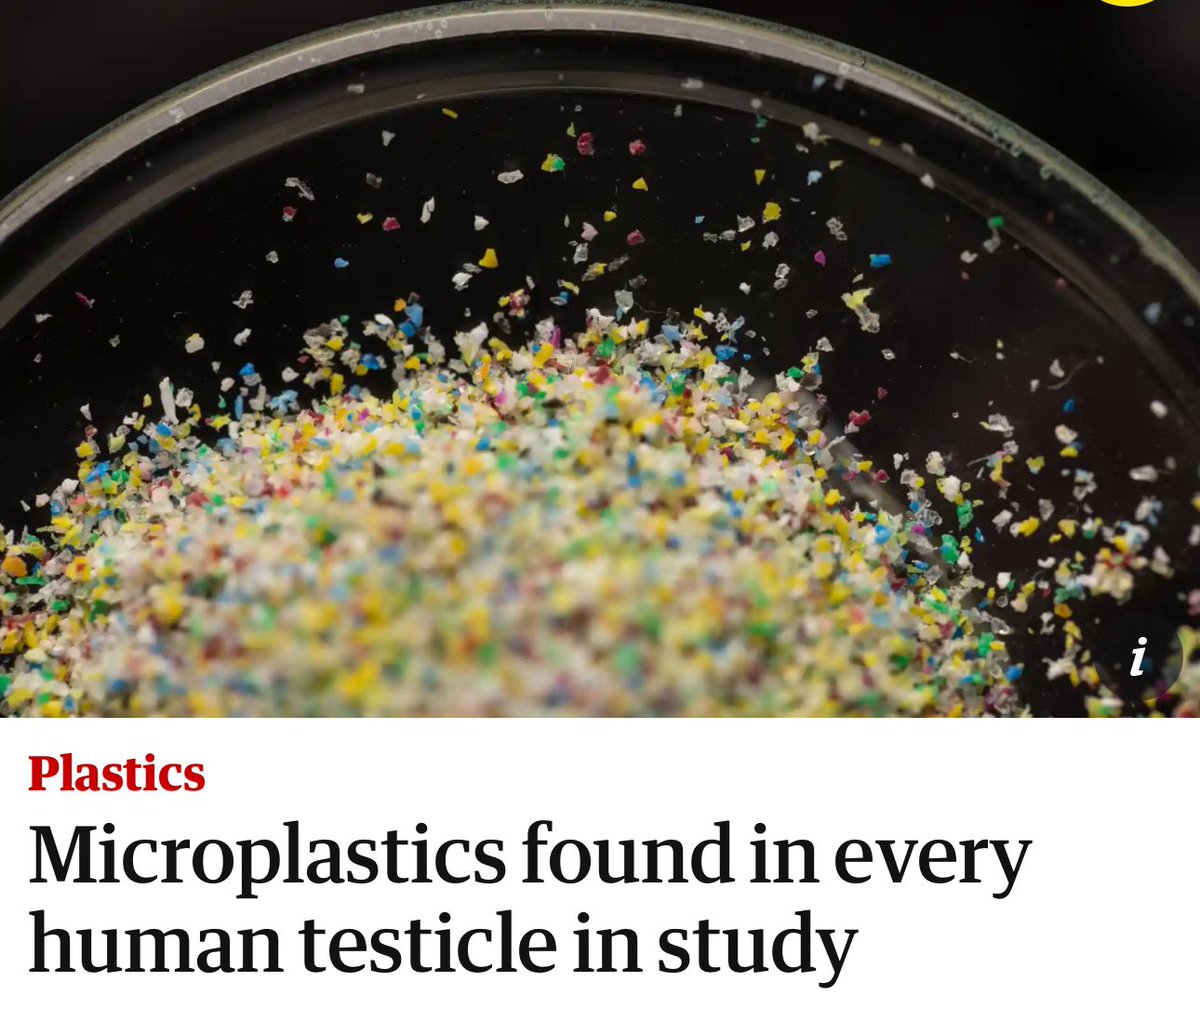 Microplastics in testicles? I guess I don’t have balls of steel